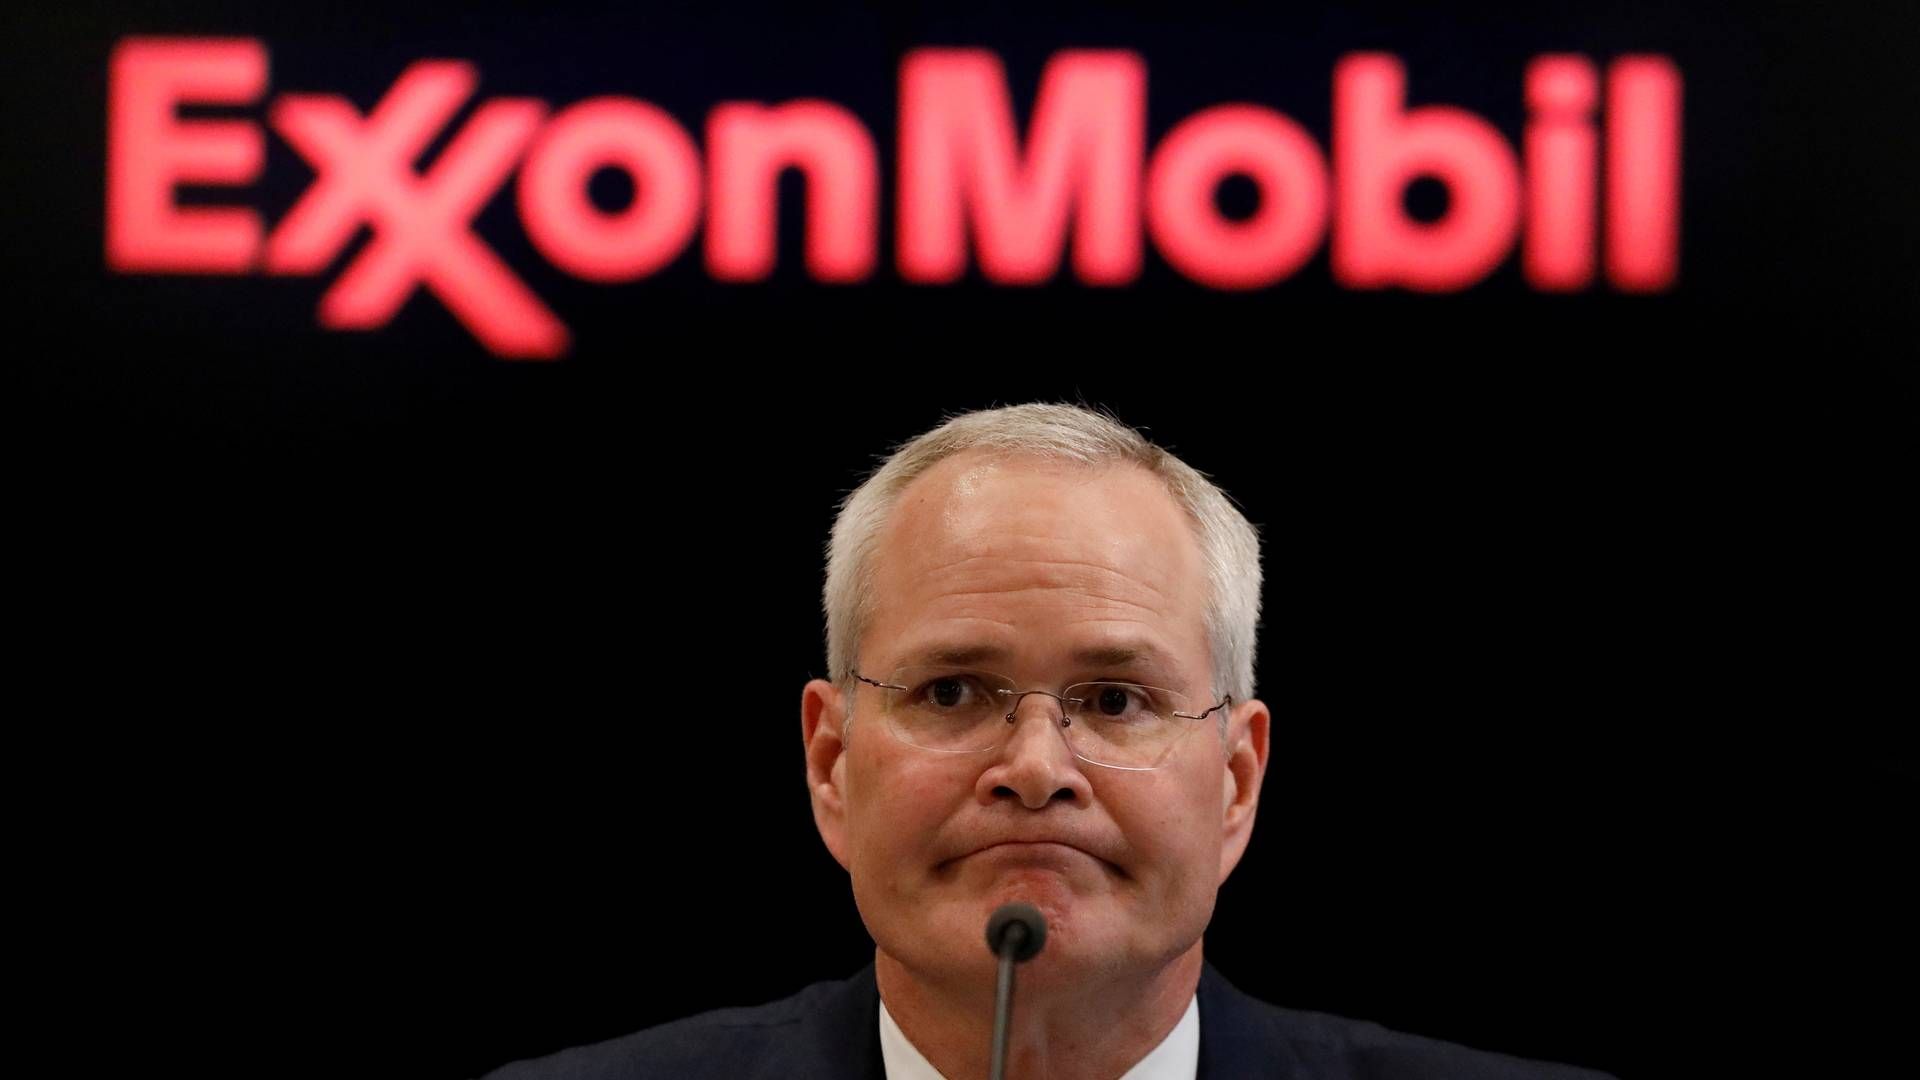 Darren Woods, chairman and CEO of Exxon Mobil Corporation, speaking at a conference in New York in 2017. | Photo: REUTERS/Brendan McDermid/File Photo